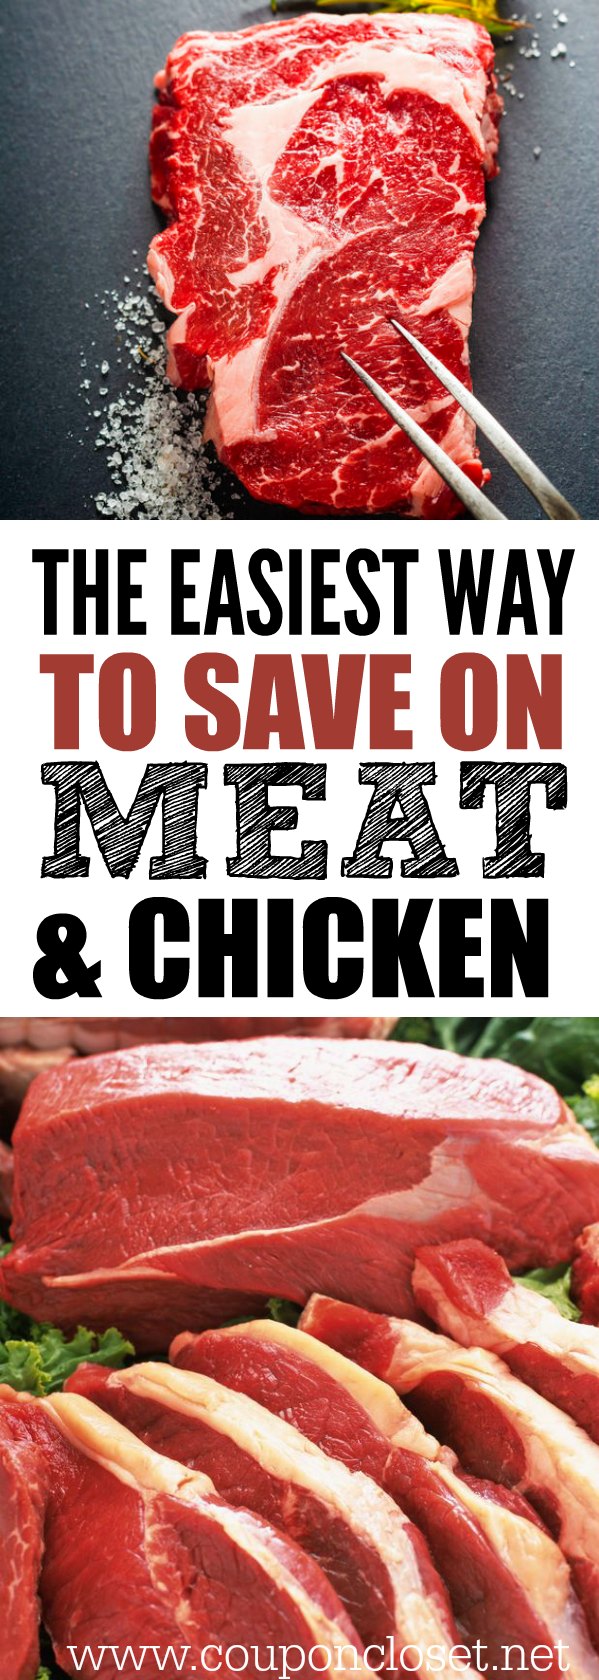 Struggling to find coupon for meat? Here is the easiest way to save money on meat - just fin your stock up prices. In 3 simple steps you will save money. 